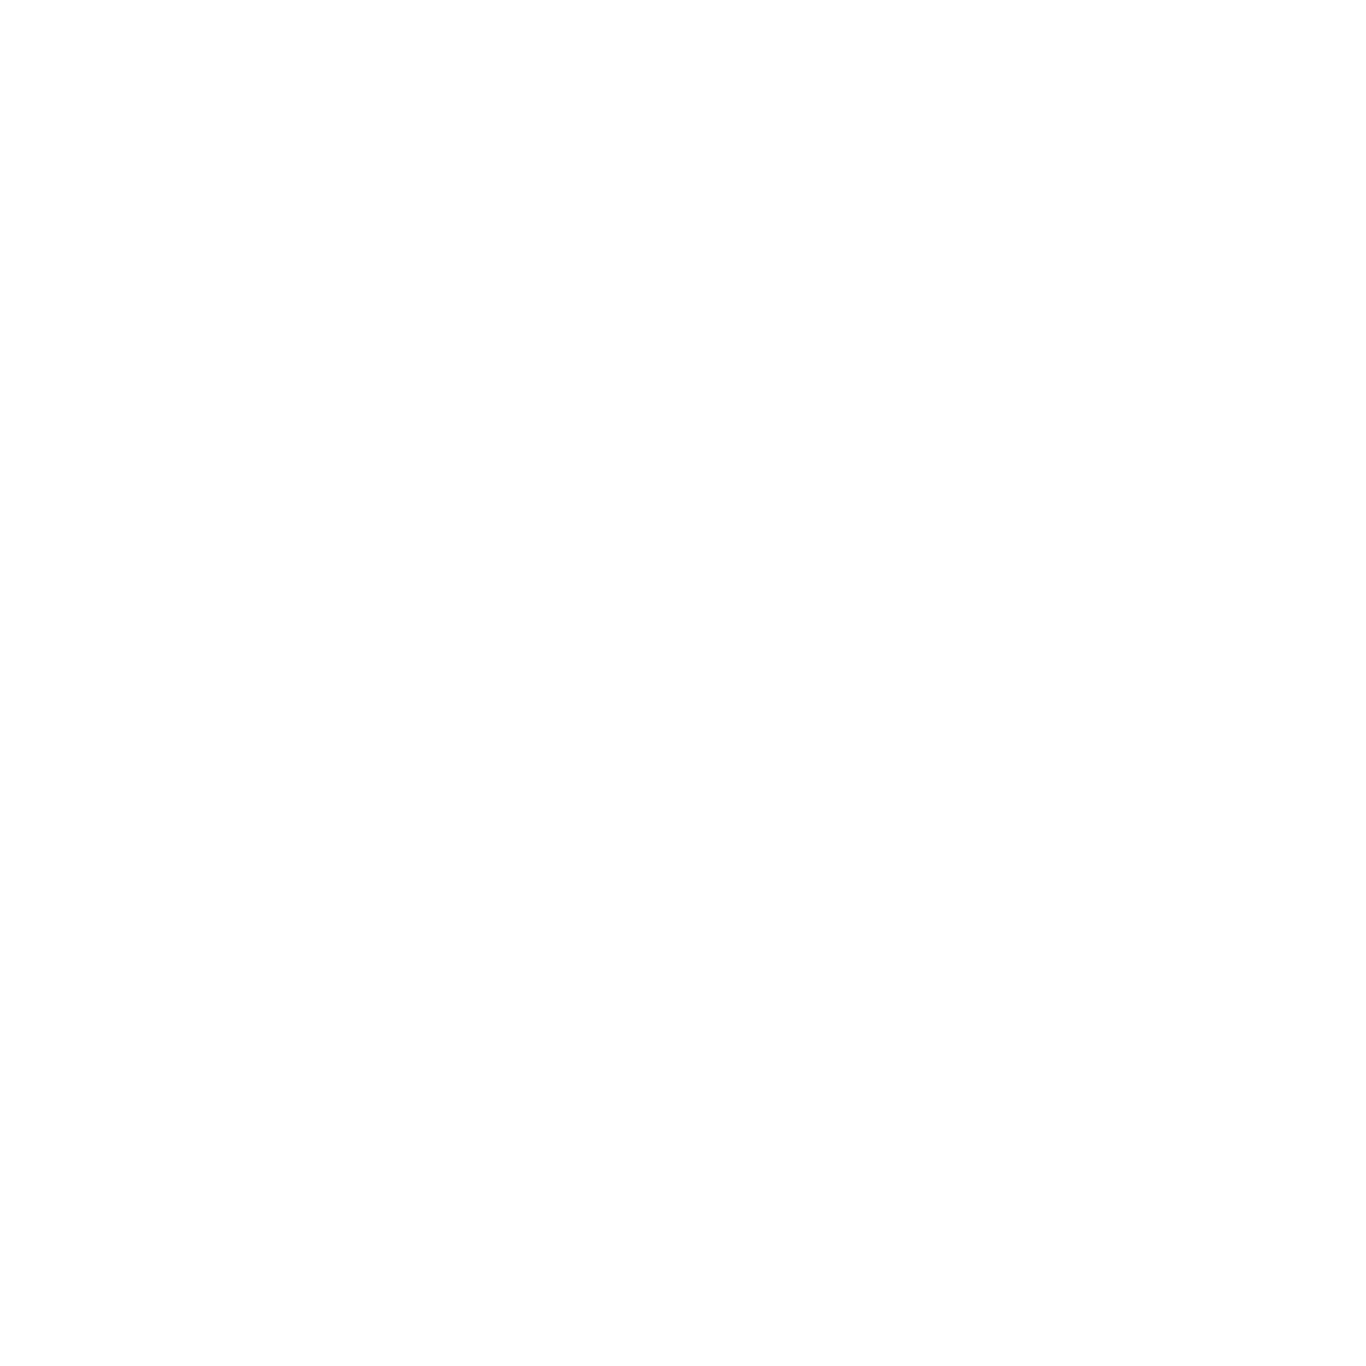 Aurora logo with white letters